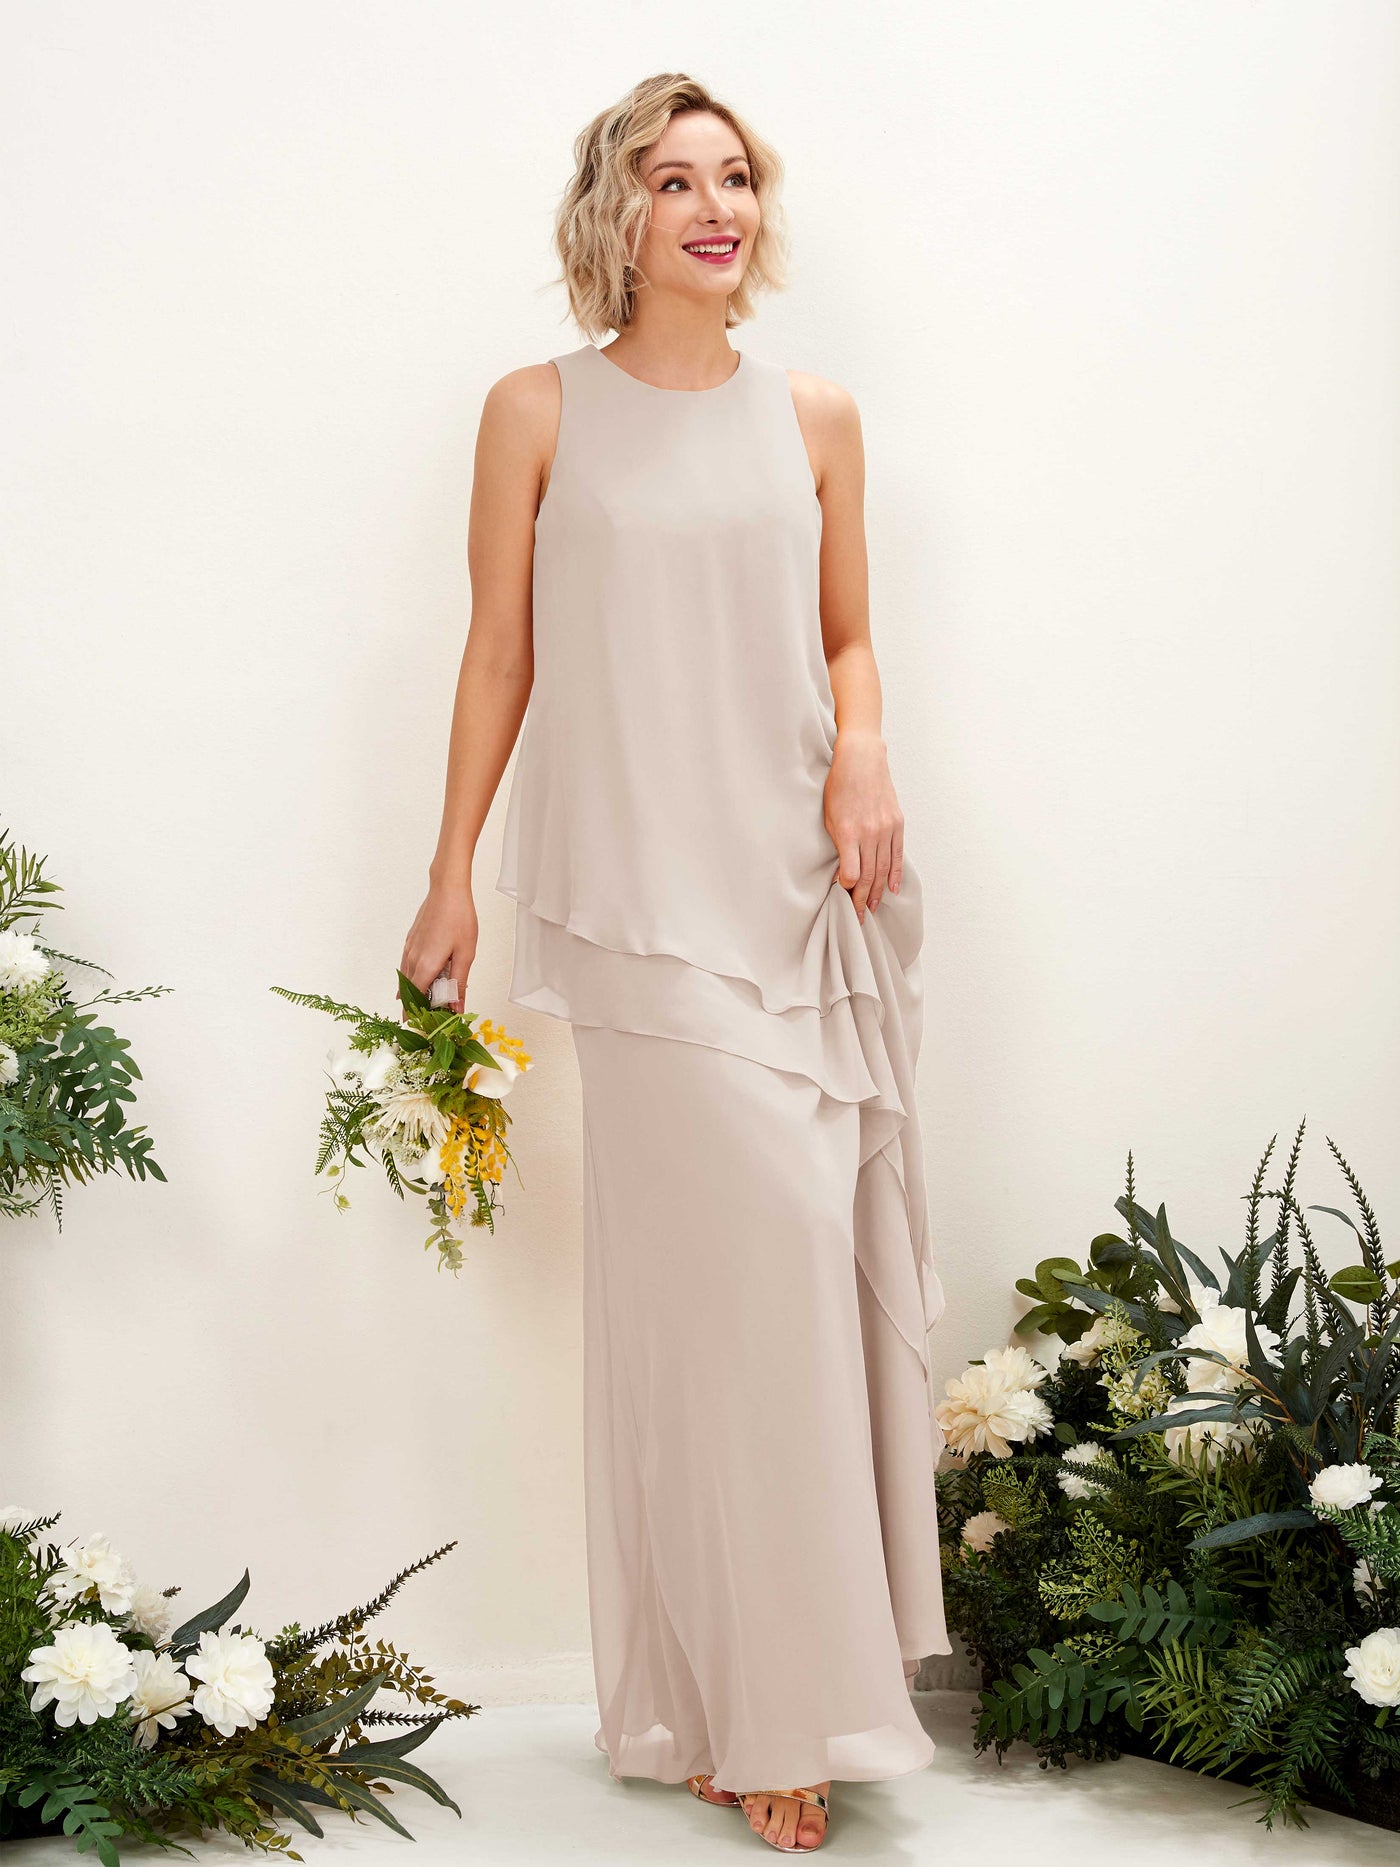 Champagne Bridesmaid Dresses Bridesmaid Dress Maternity Chiffon Round Full Length Sleeveless Wedding Party Dress (81222316)#color_champagne